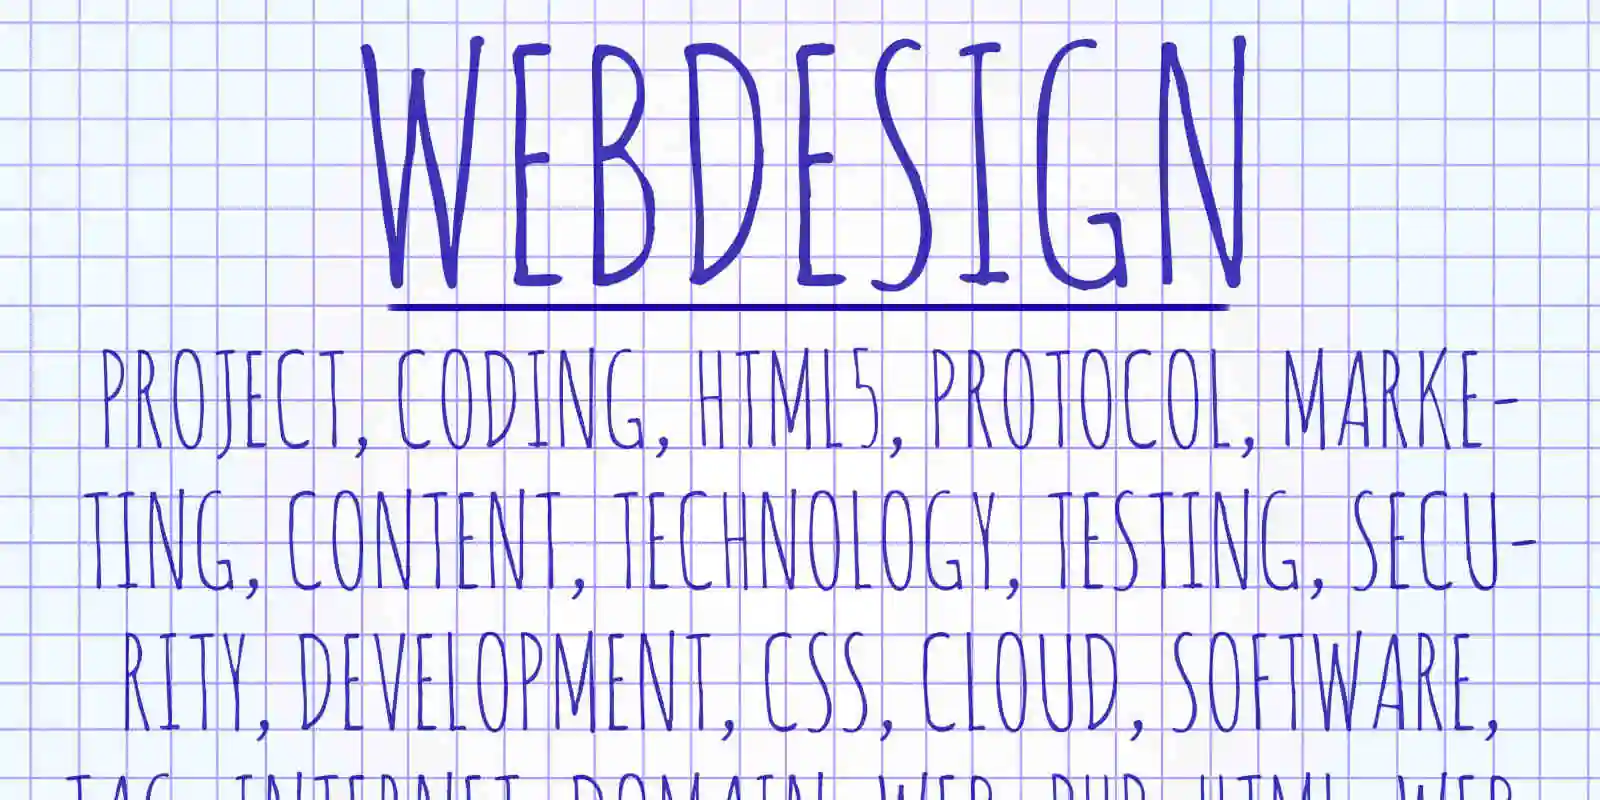 web design and other words relating to web design written on white board